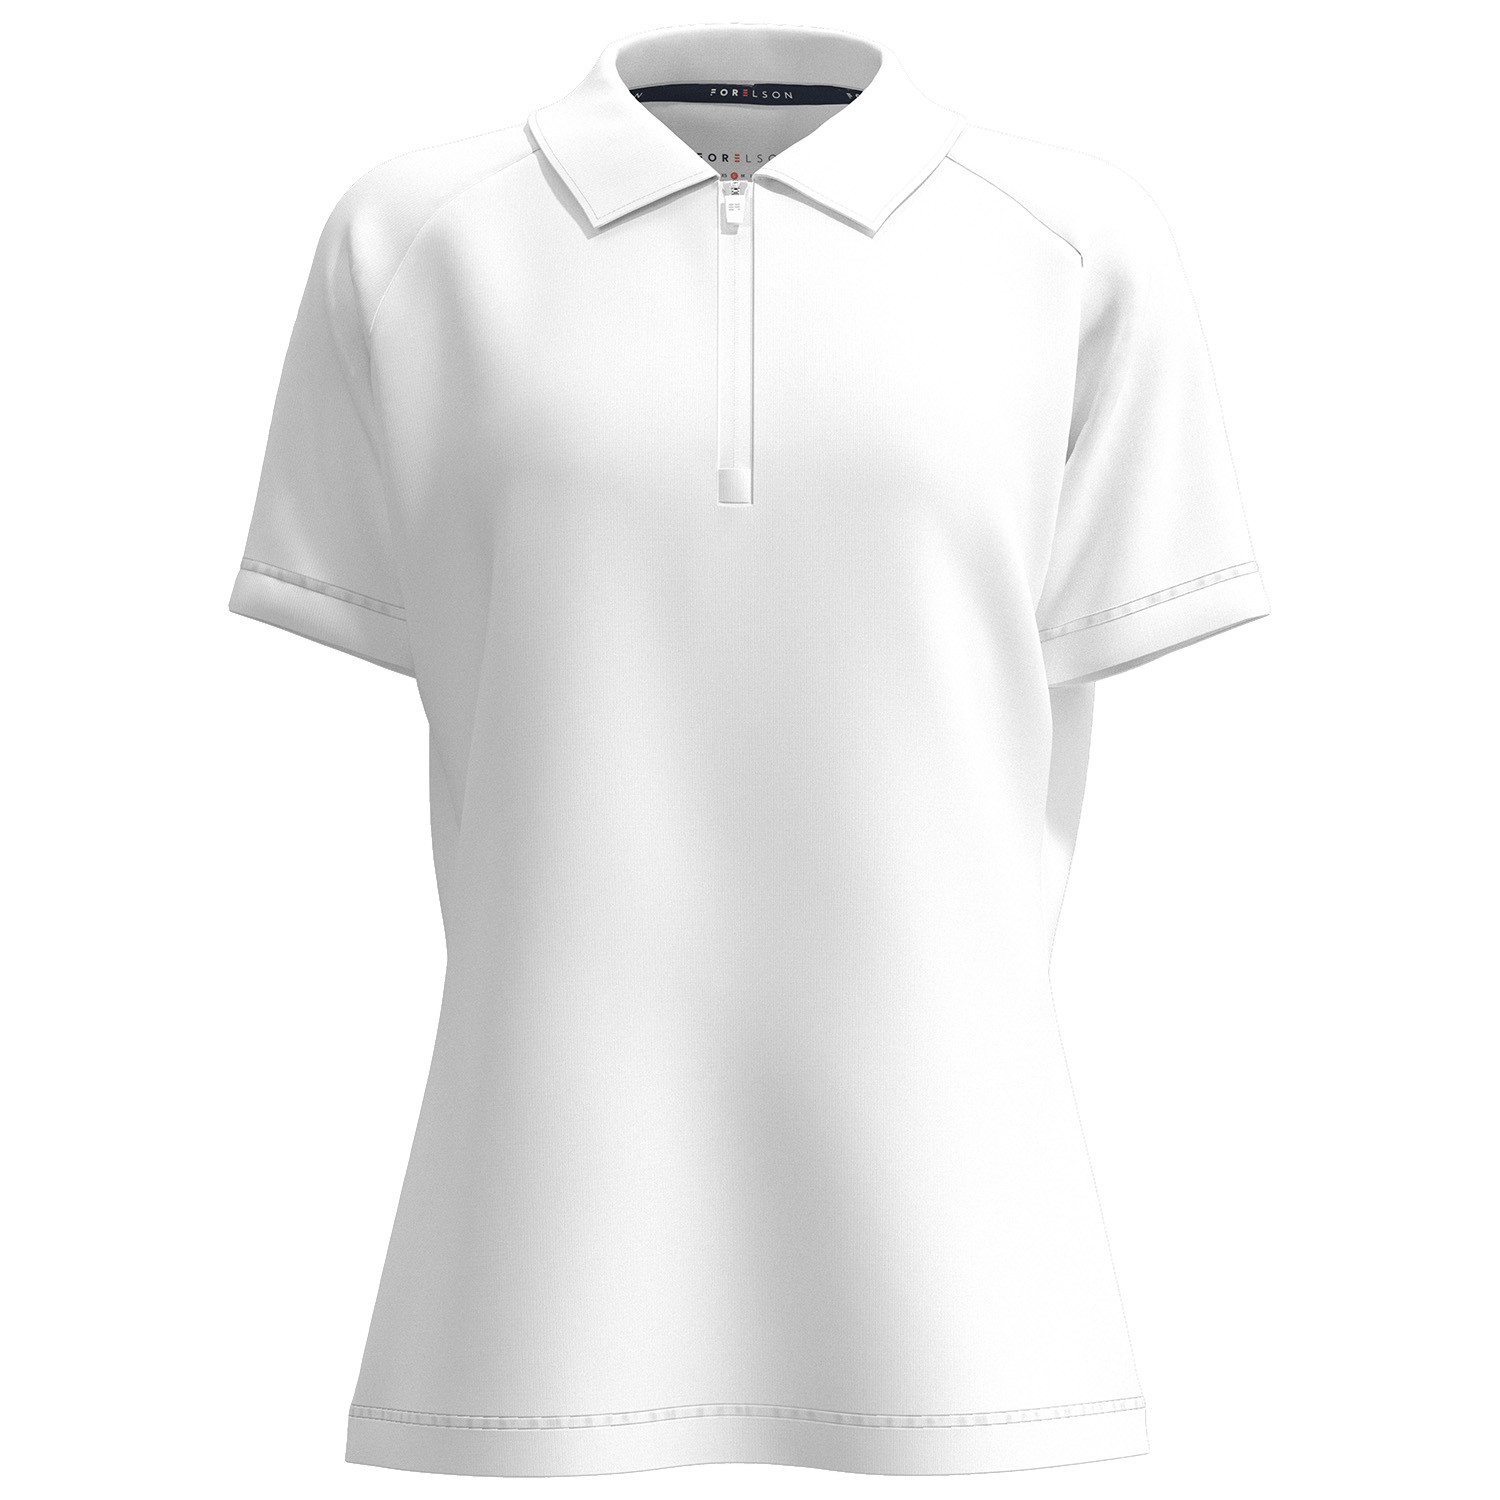 Image of Forelson Blockley Zip Neck Ladies Polo Shirt